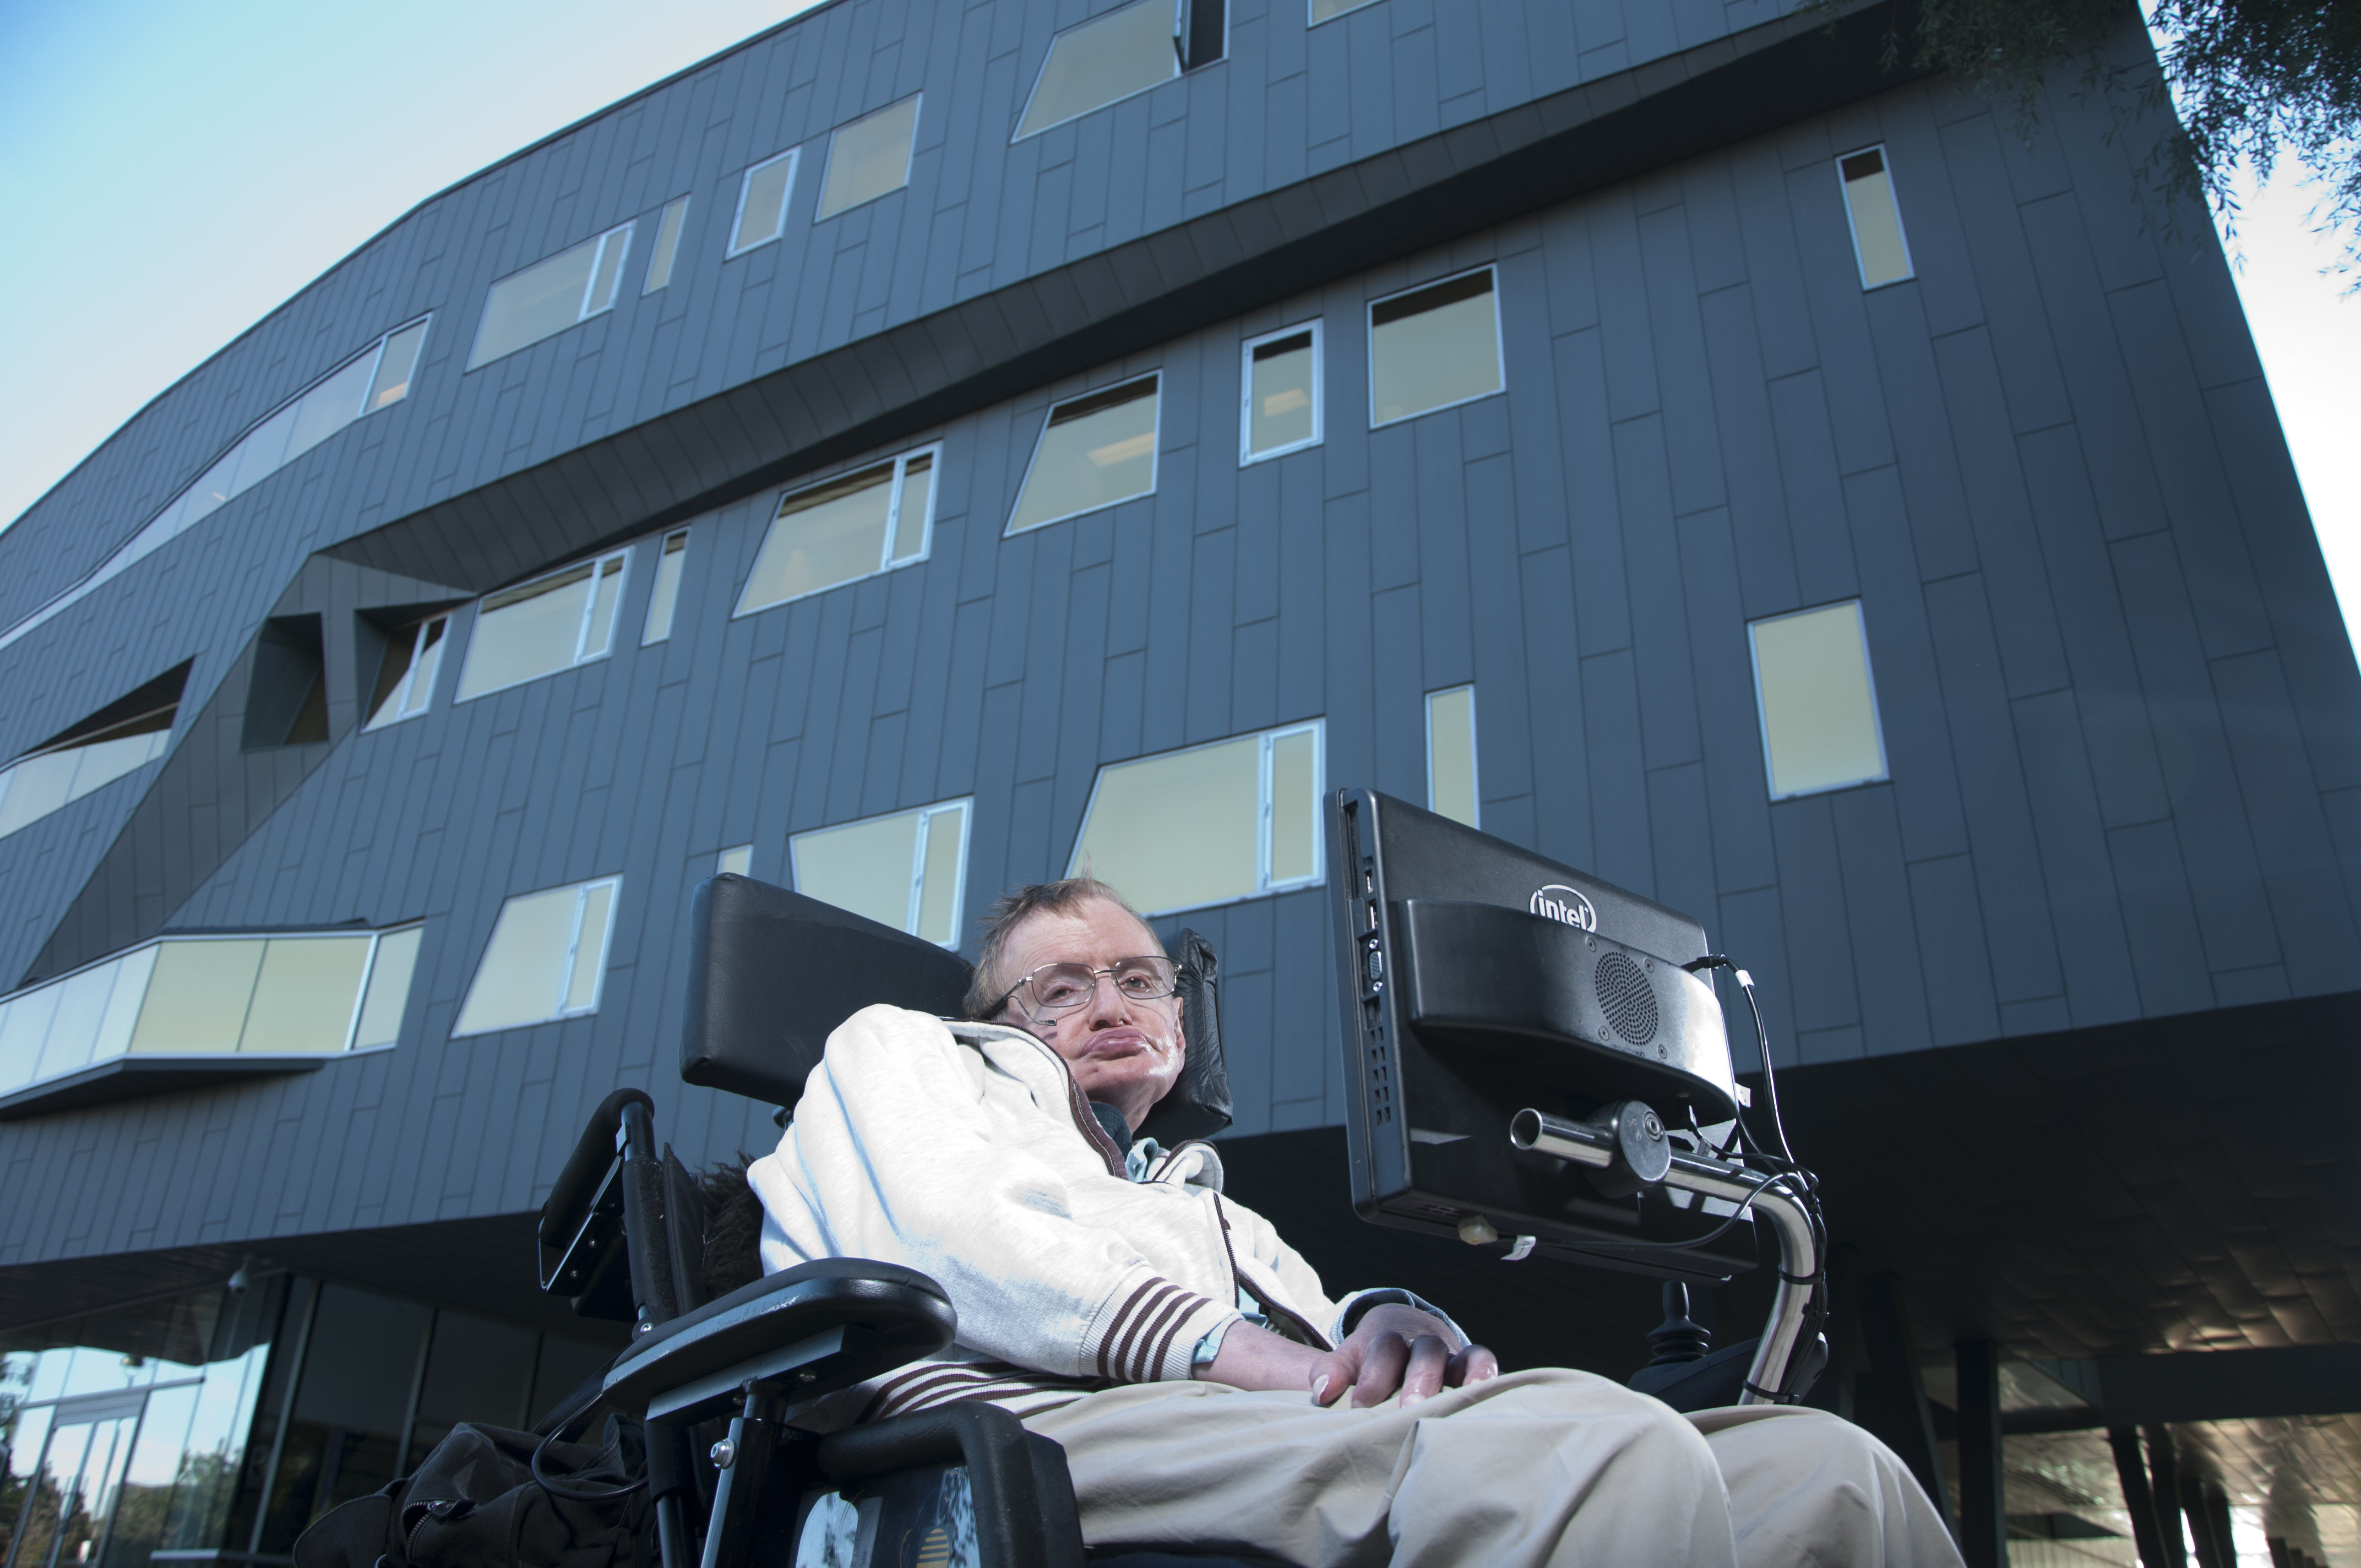 Stephen Hawking in front of the facade of Perimeter Institute